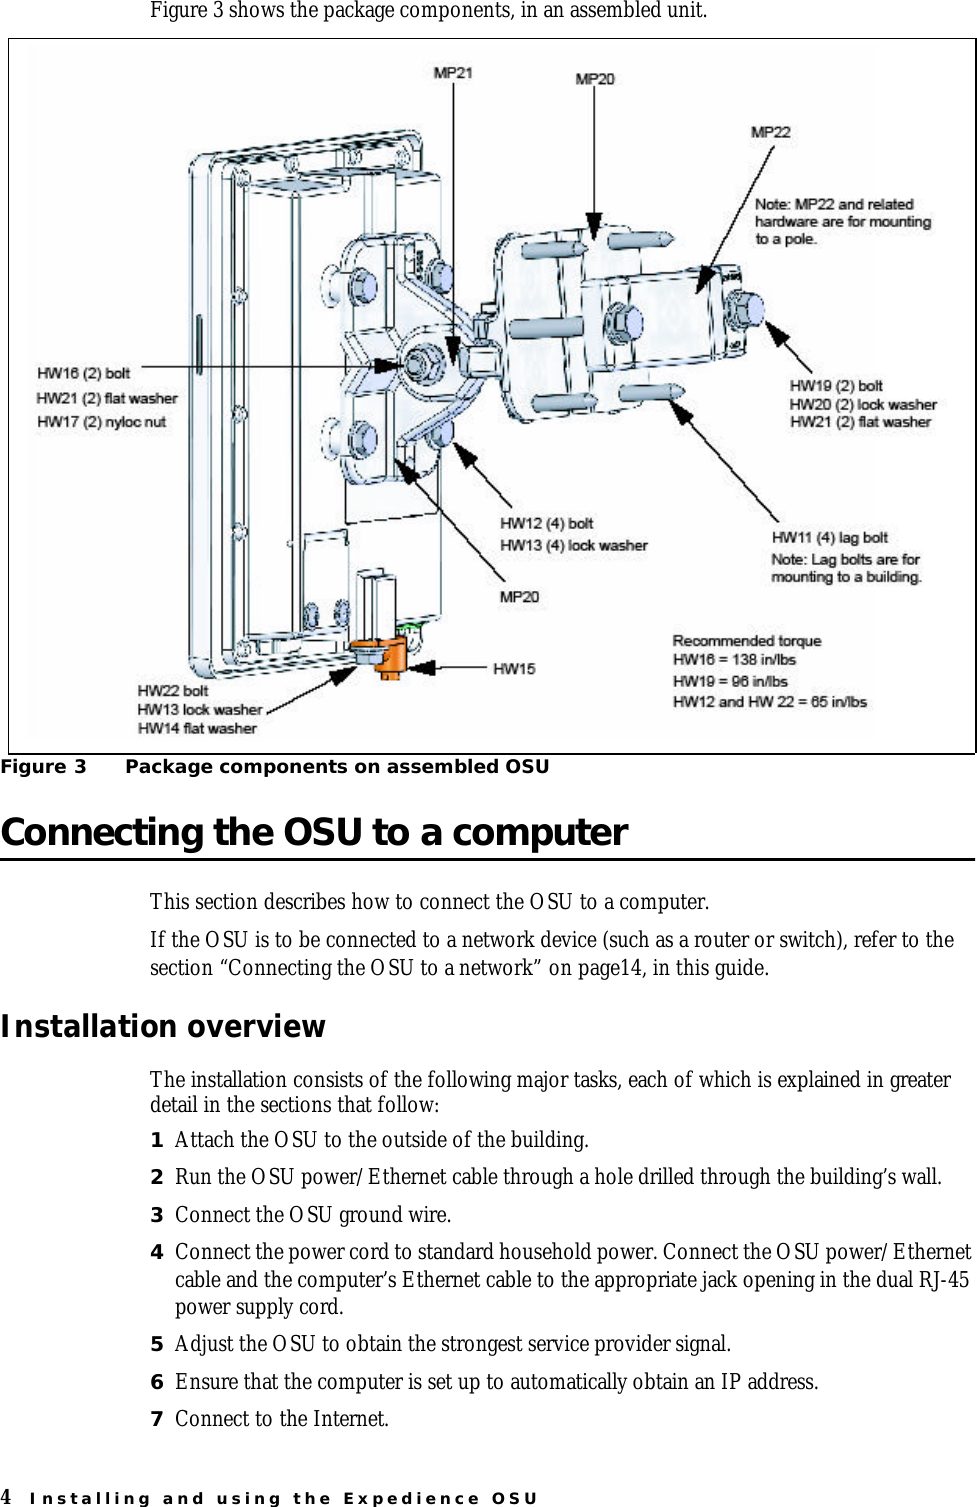 4Installing and using the Expedience OSUFigure 3 shows the package components, in an assembled unit.Connecting the OSU to a computerThis section describes how to connect the OSU to a computer. If the OSU is to be connected to a network device (such as a router or switch), refer to the section “Connecting the OSU to a network” on page14, in this guide. Installation overviewThe installation consists of the following major tasks, each of which is explained in greater detail in the sections that follow:1Attach the OSU to the outside of the building.2Run the OSU power/Ethernet cable through a hole drilled through the building’s wall.3Connect the OSU ground wire.4Connect the power cord to standard household power. Connect the OSU power/Ethernet cable and the computer’s Ethernet cable to the appropriate jack opening in the dual RJ-45 power supply cord.5Adjust the OSU to obtain the strongest service provider signal.6Ensure that the computer is set up to automatically obtain an IP address.7Connect to the Internet.Figure 3 Package components on assembled OSU 